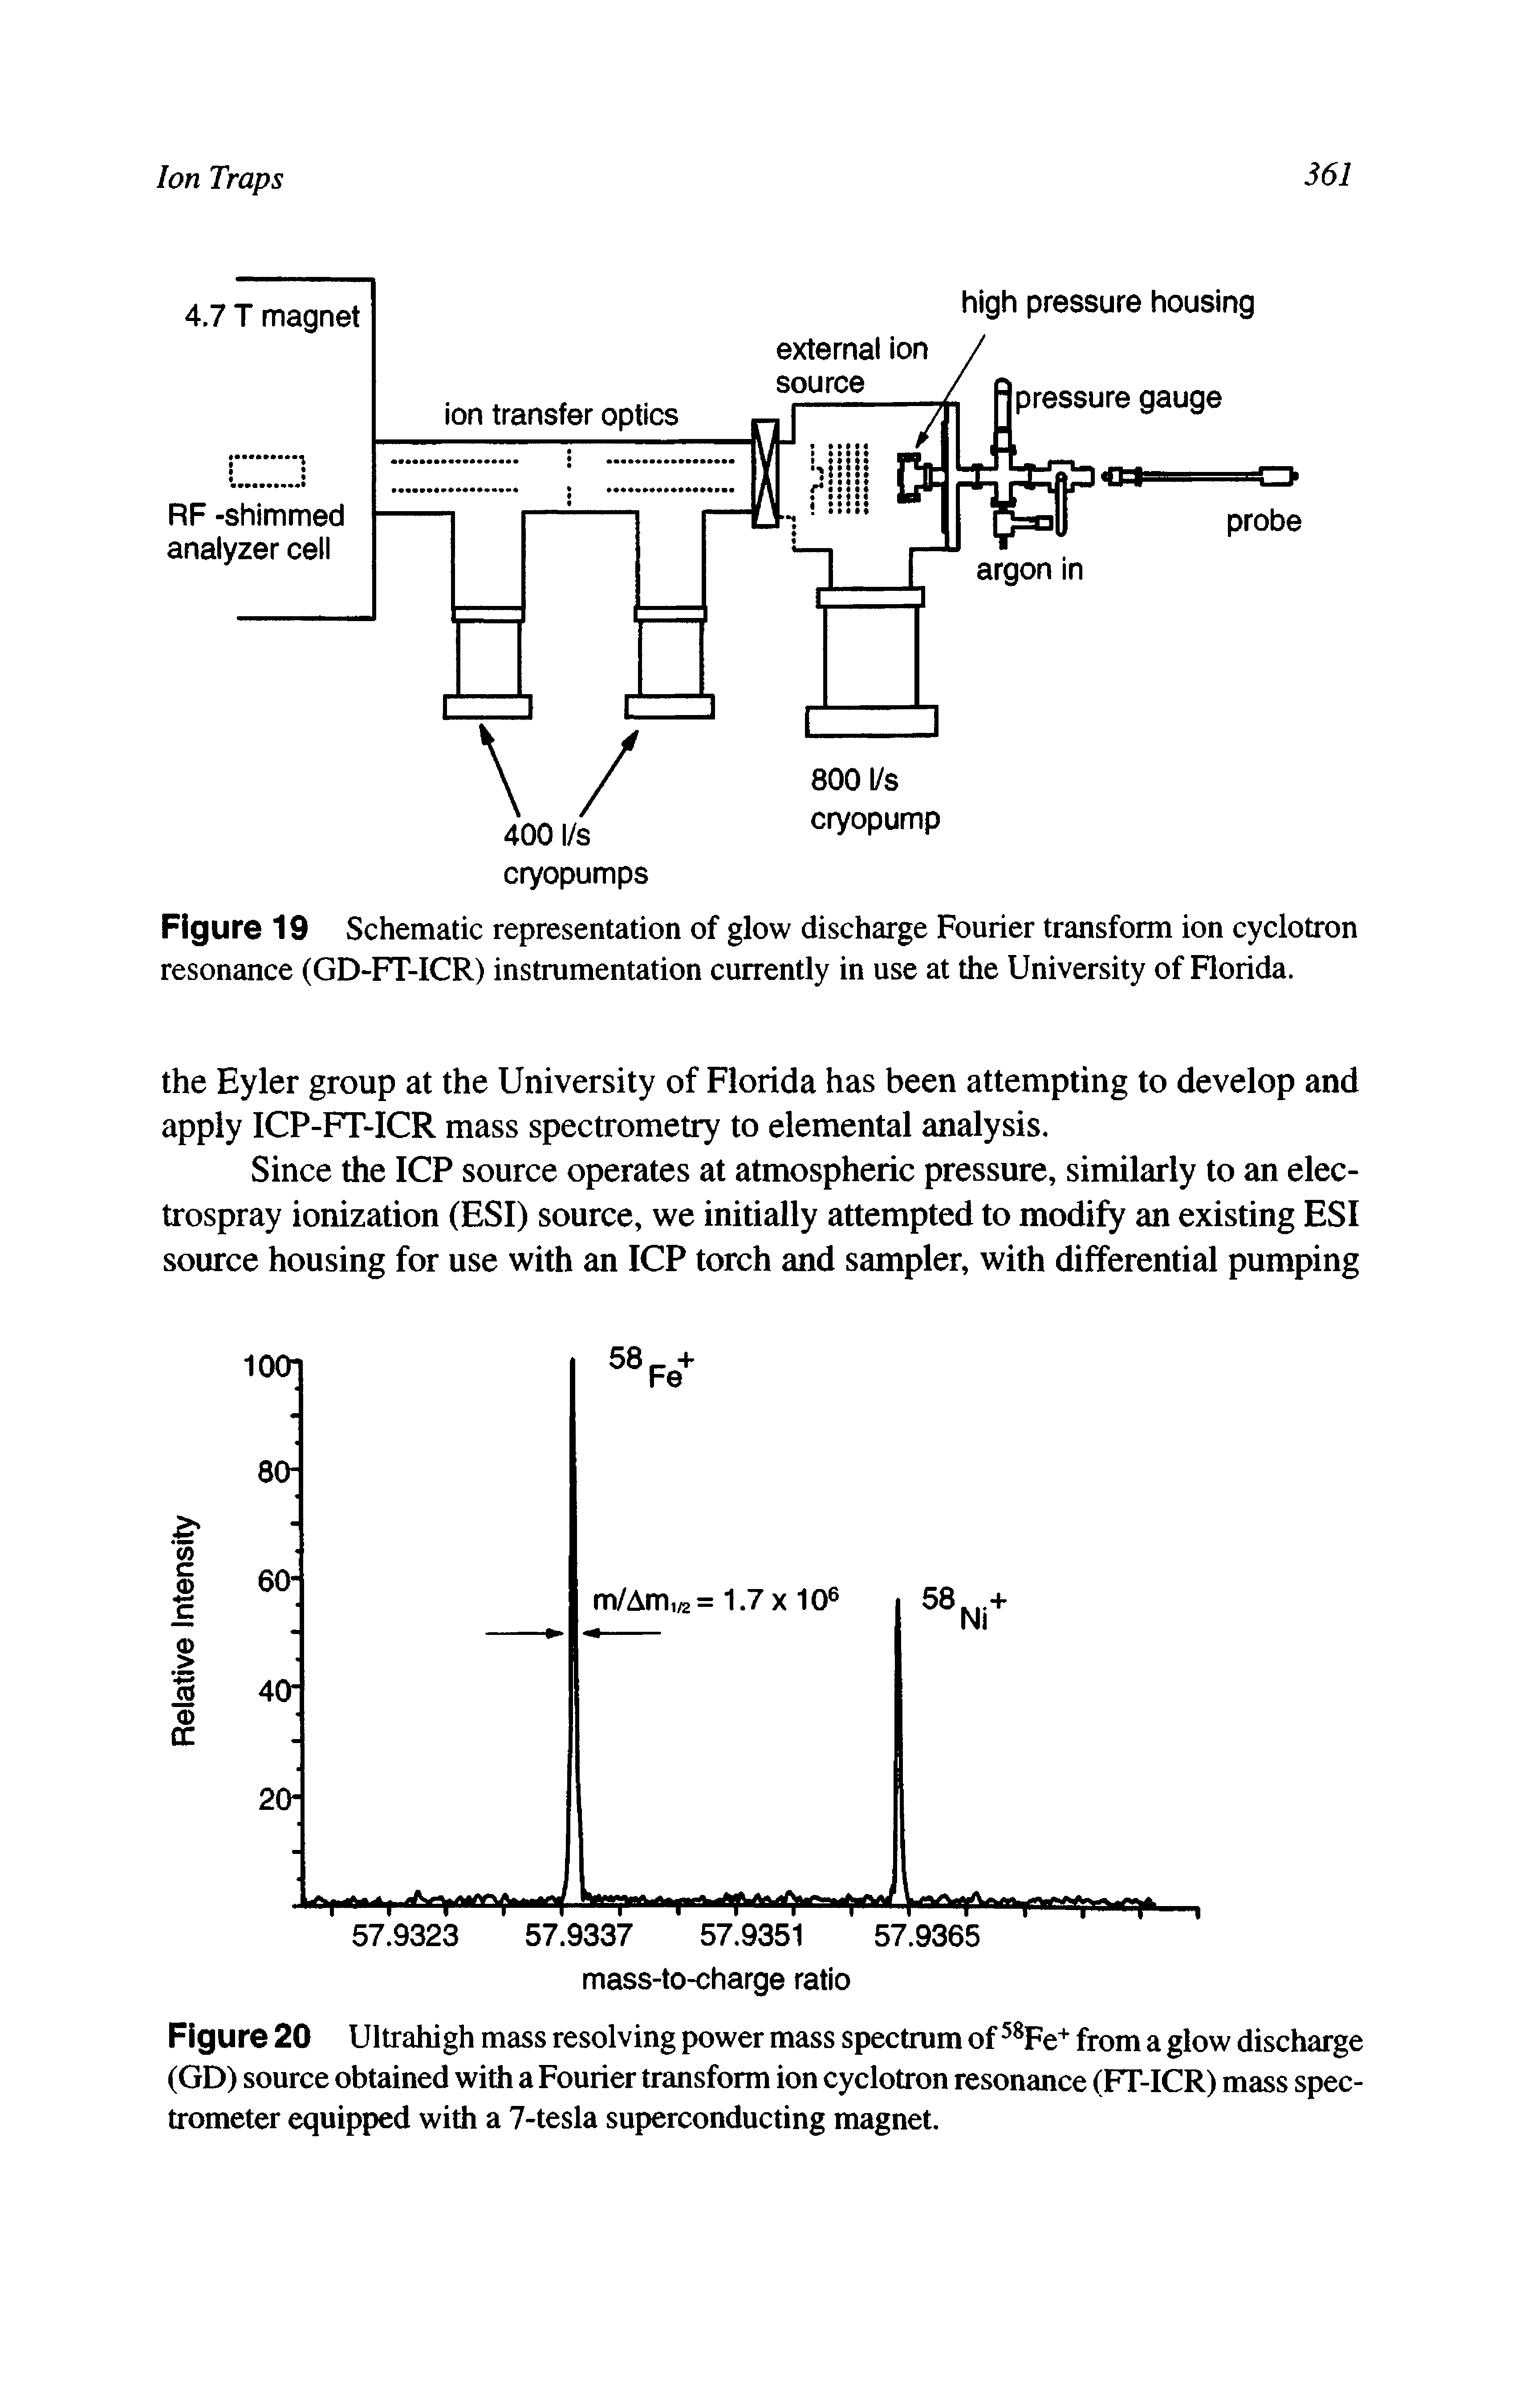 Figure 19 Schematic representation of glow discharge Fourier transform ion cyclotron resonance (GD-FT-ICR) instrumentation currently in use at the University of Florida.